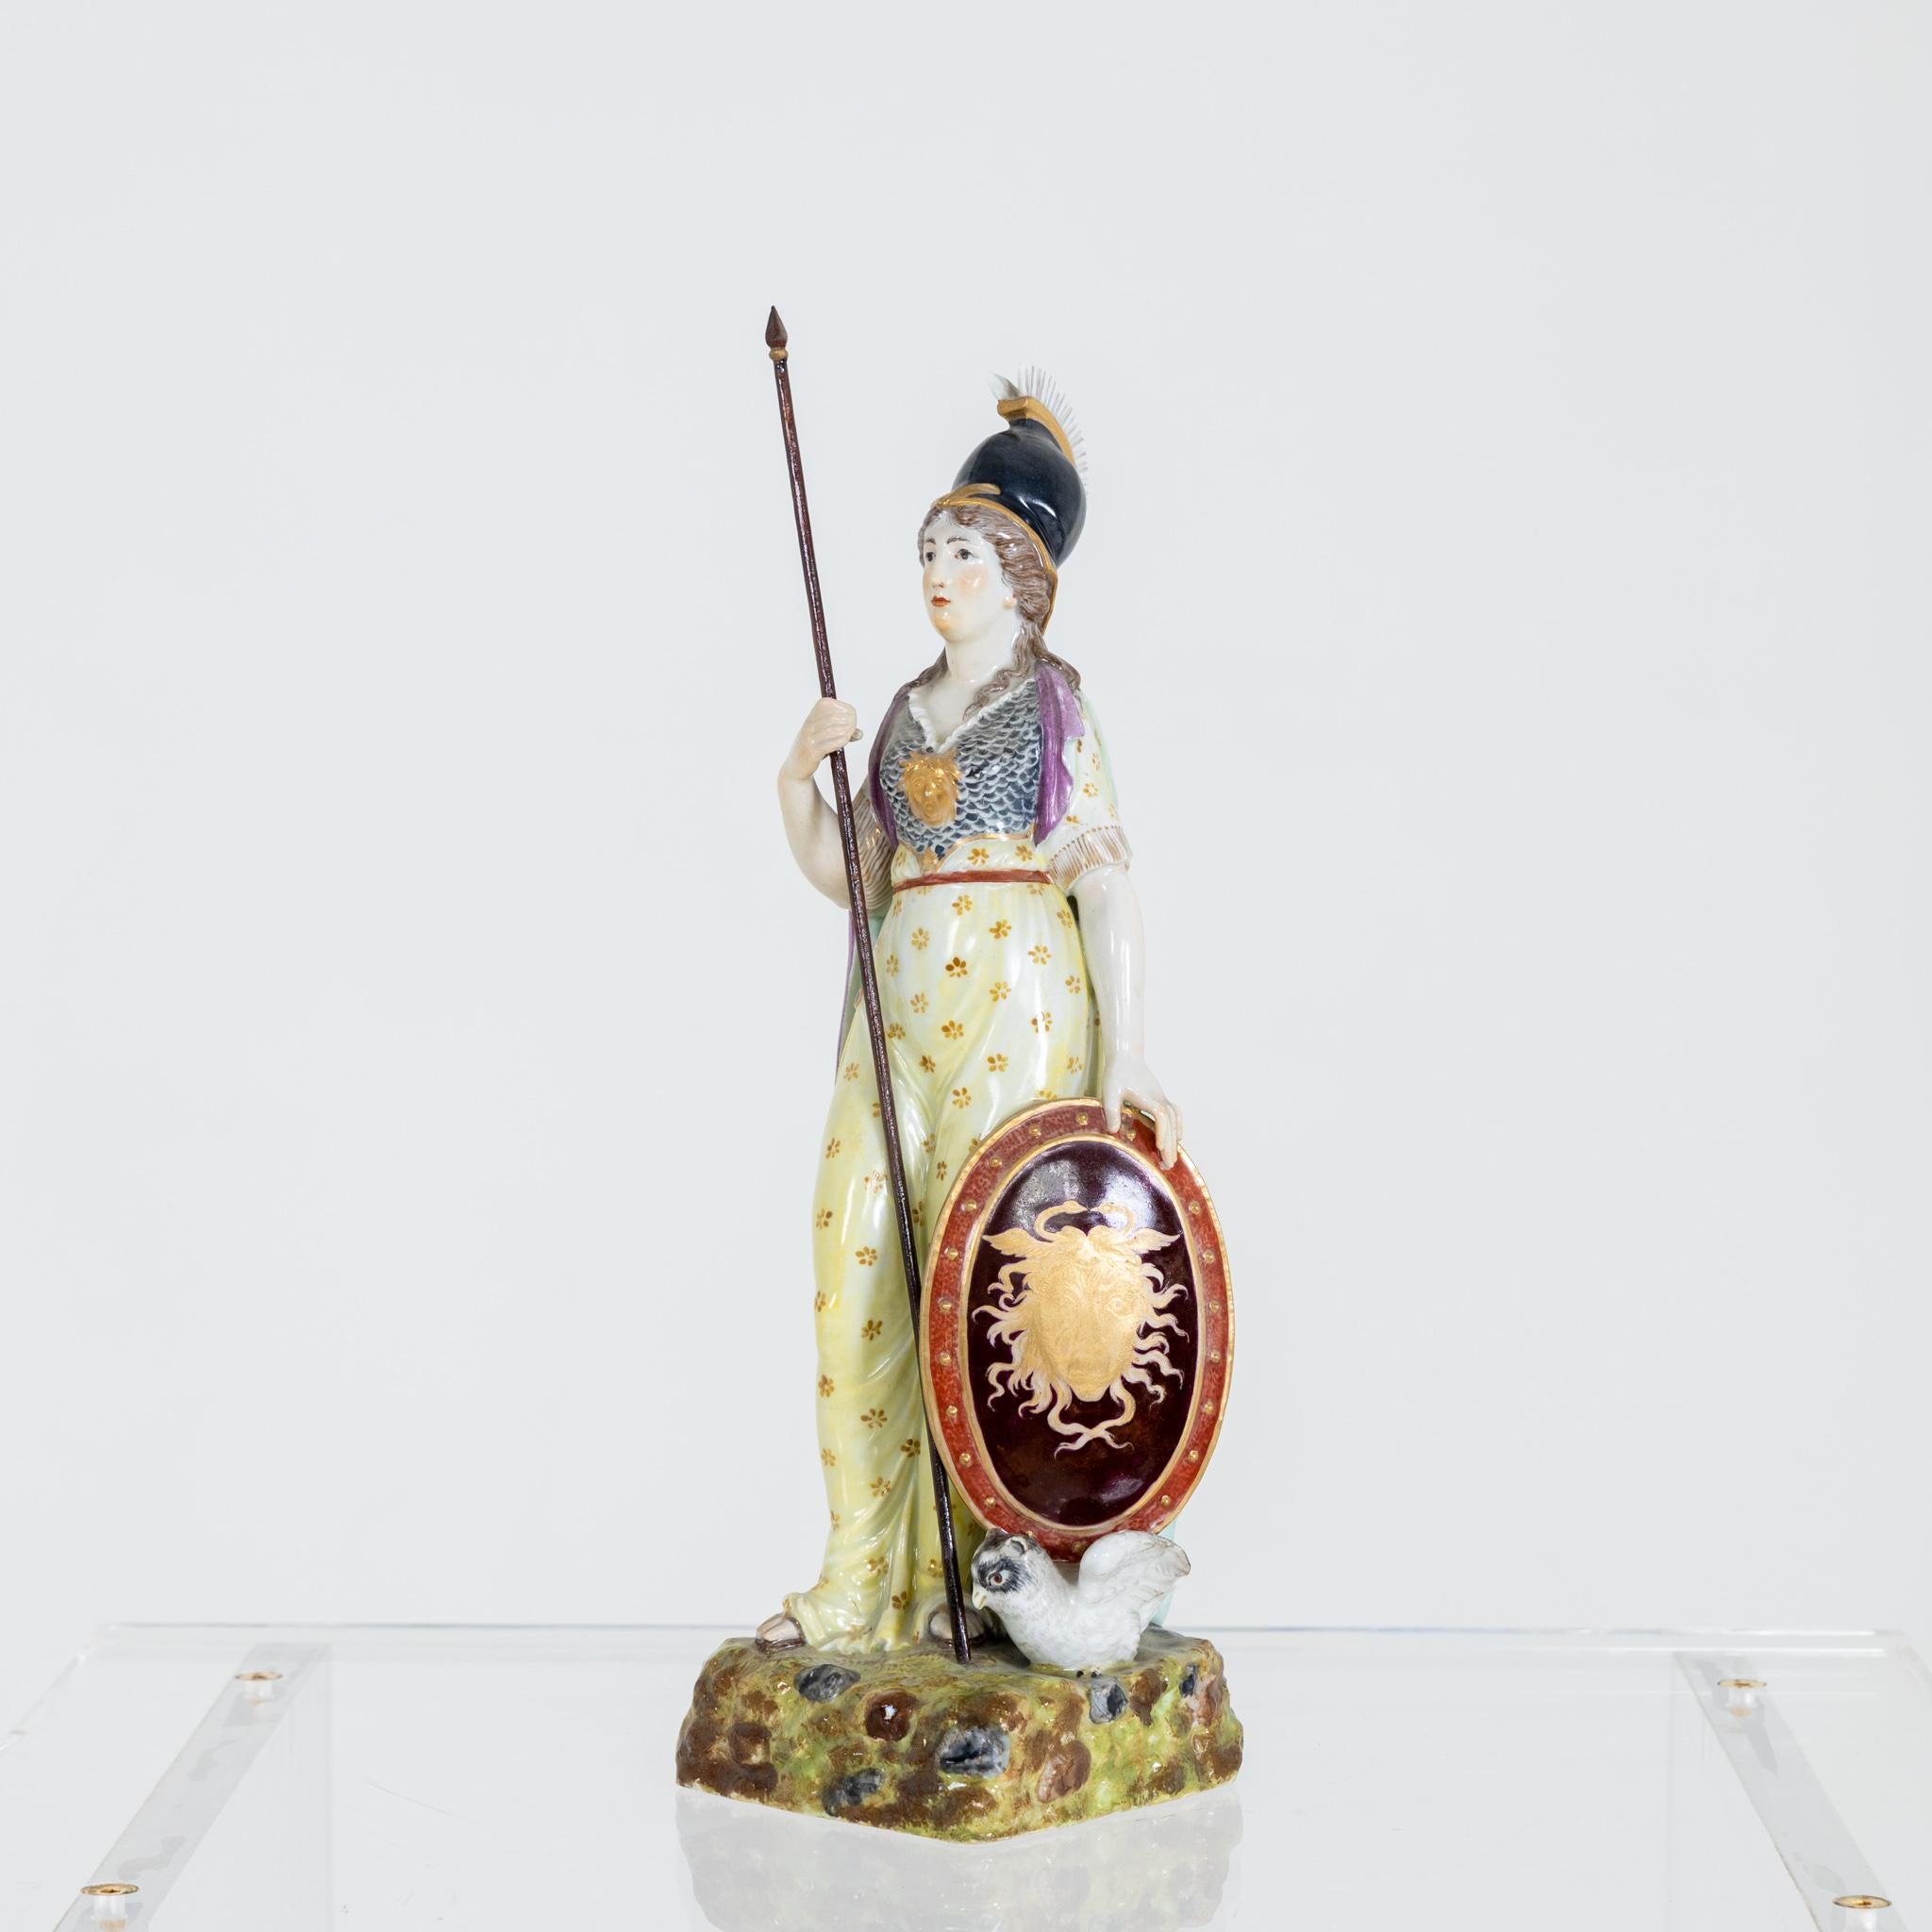 Polychrome painted porcelain figure of Pallas Athena with owl and Gorgon shield.